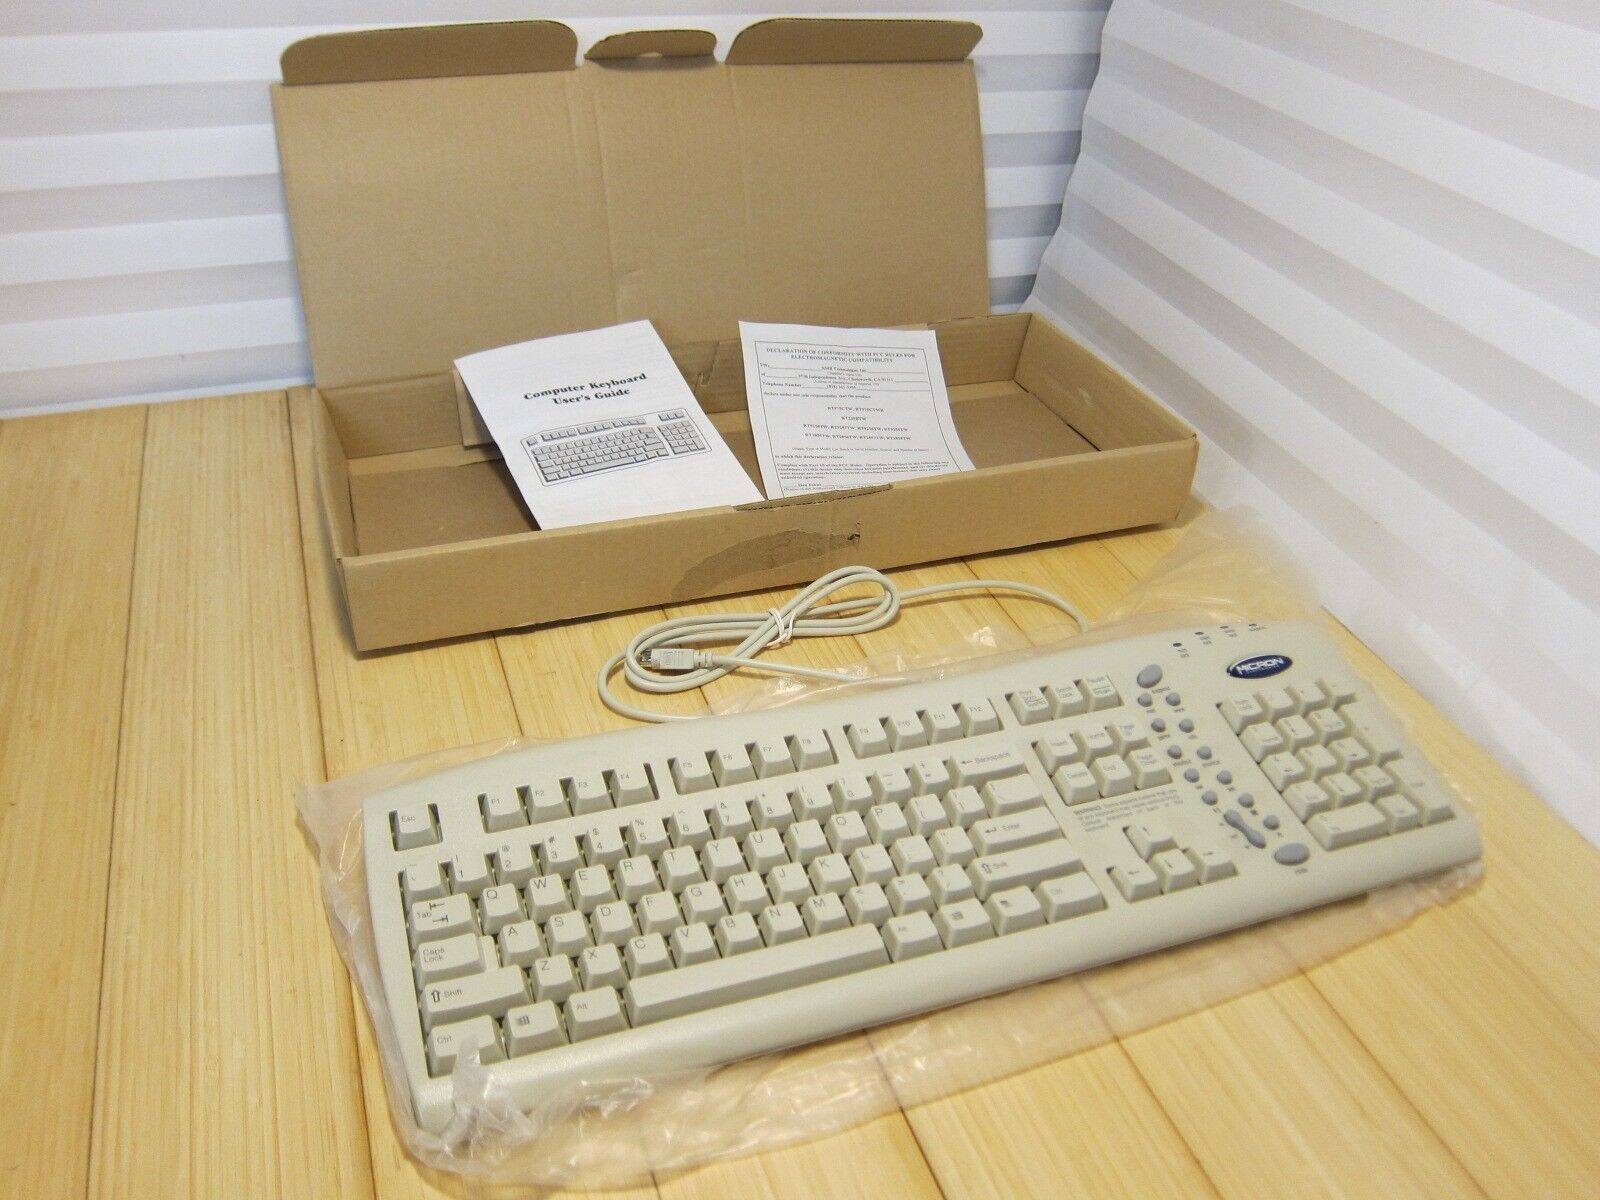 NOS Vintage Retro Micron NMB for Micron Windows Keyboard RT9258TW PS/2 (1 of 3). Available Now for 64.99